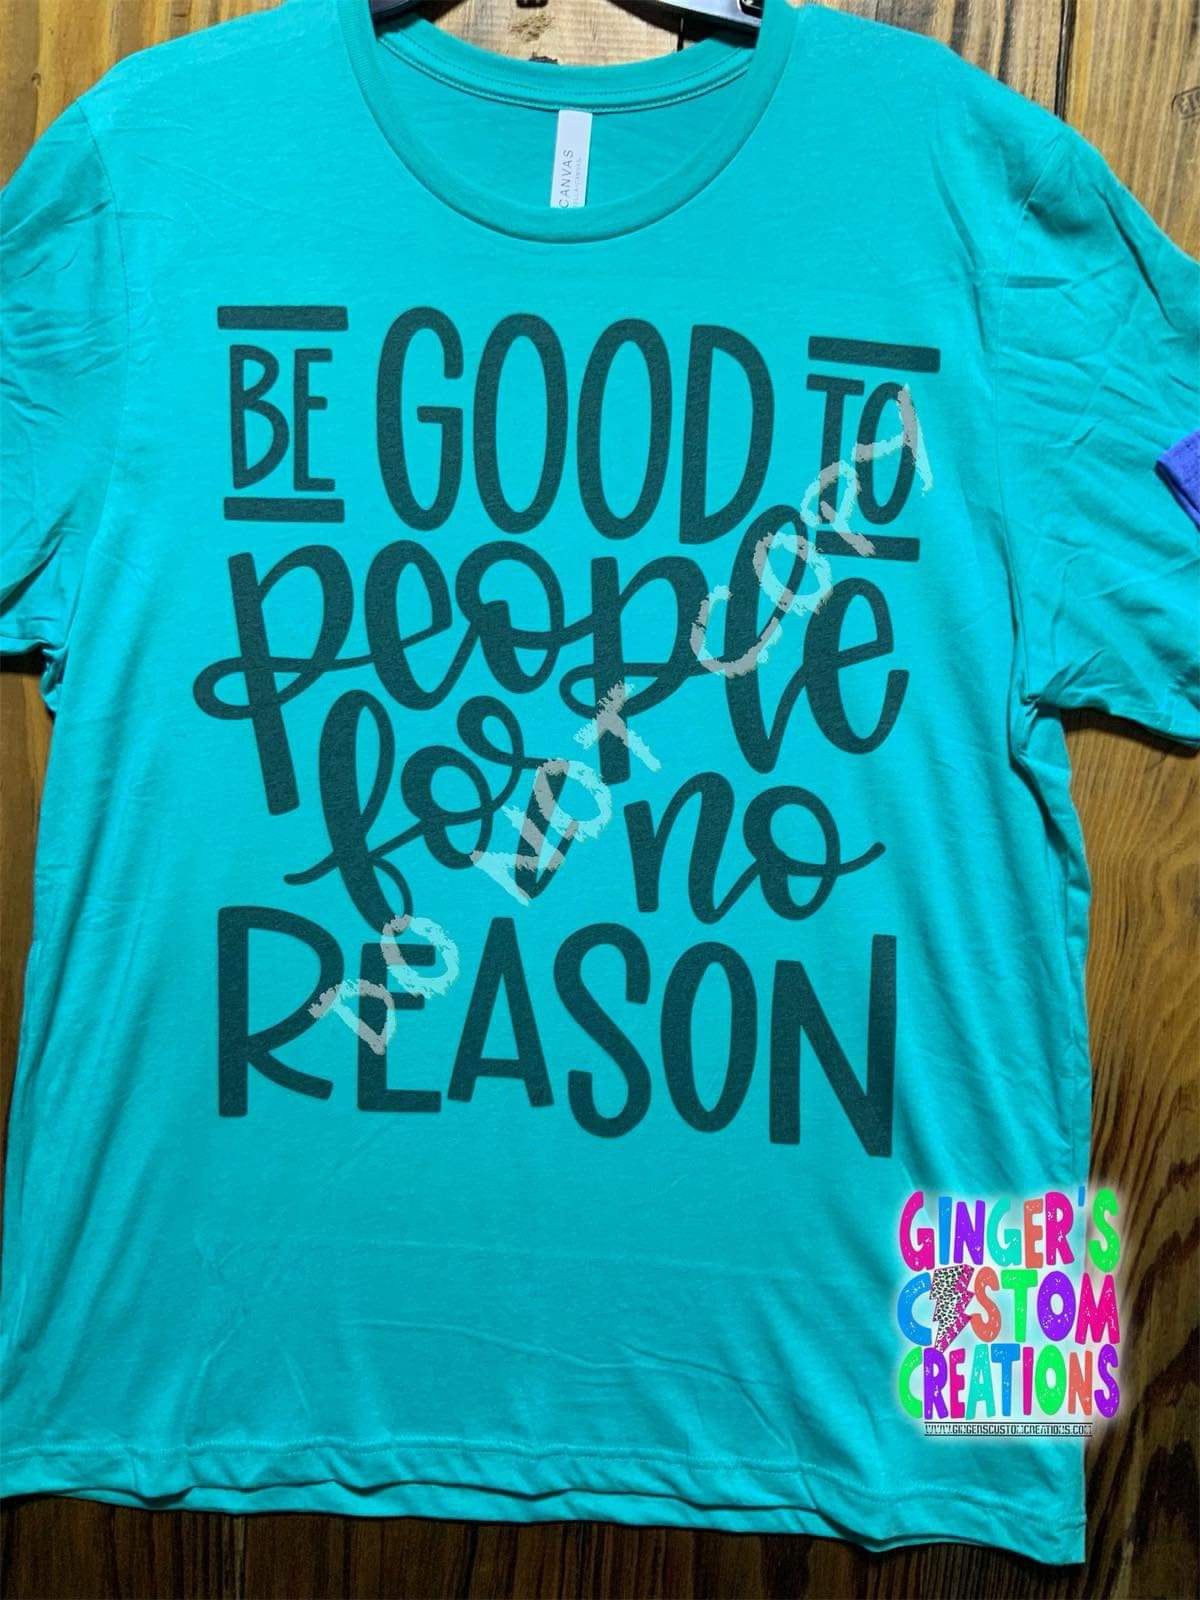 BE GOOD TO PEOPLE FOR NO REASON SHIRT